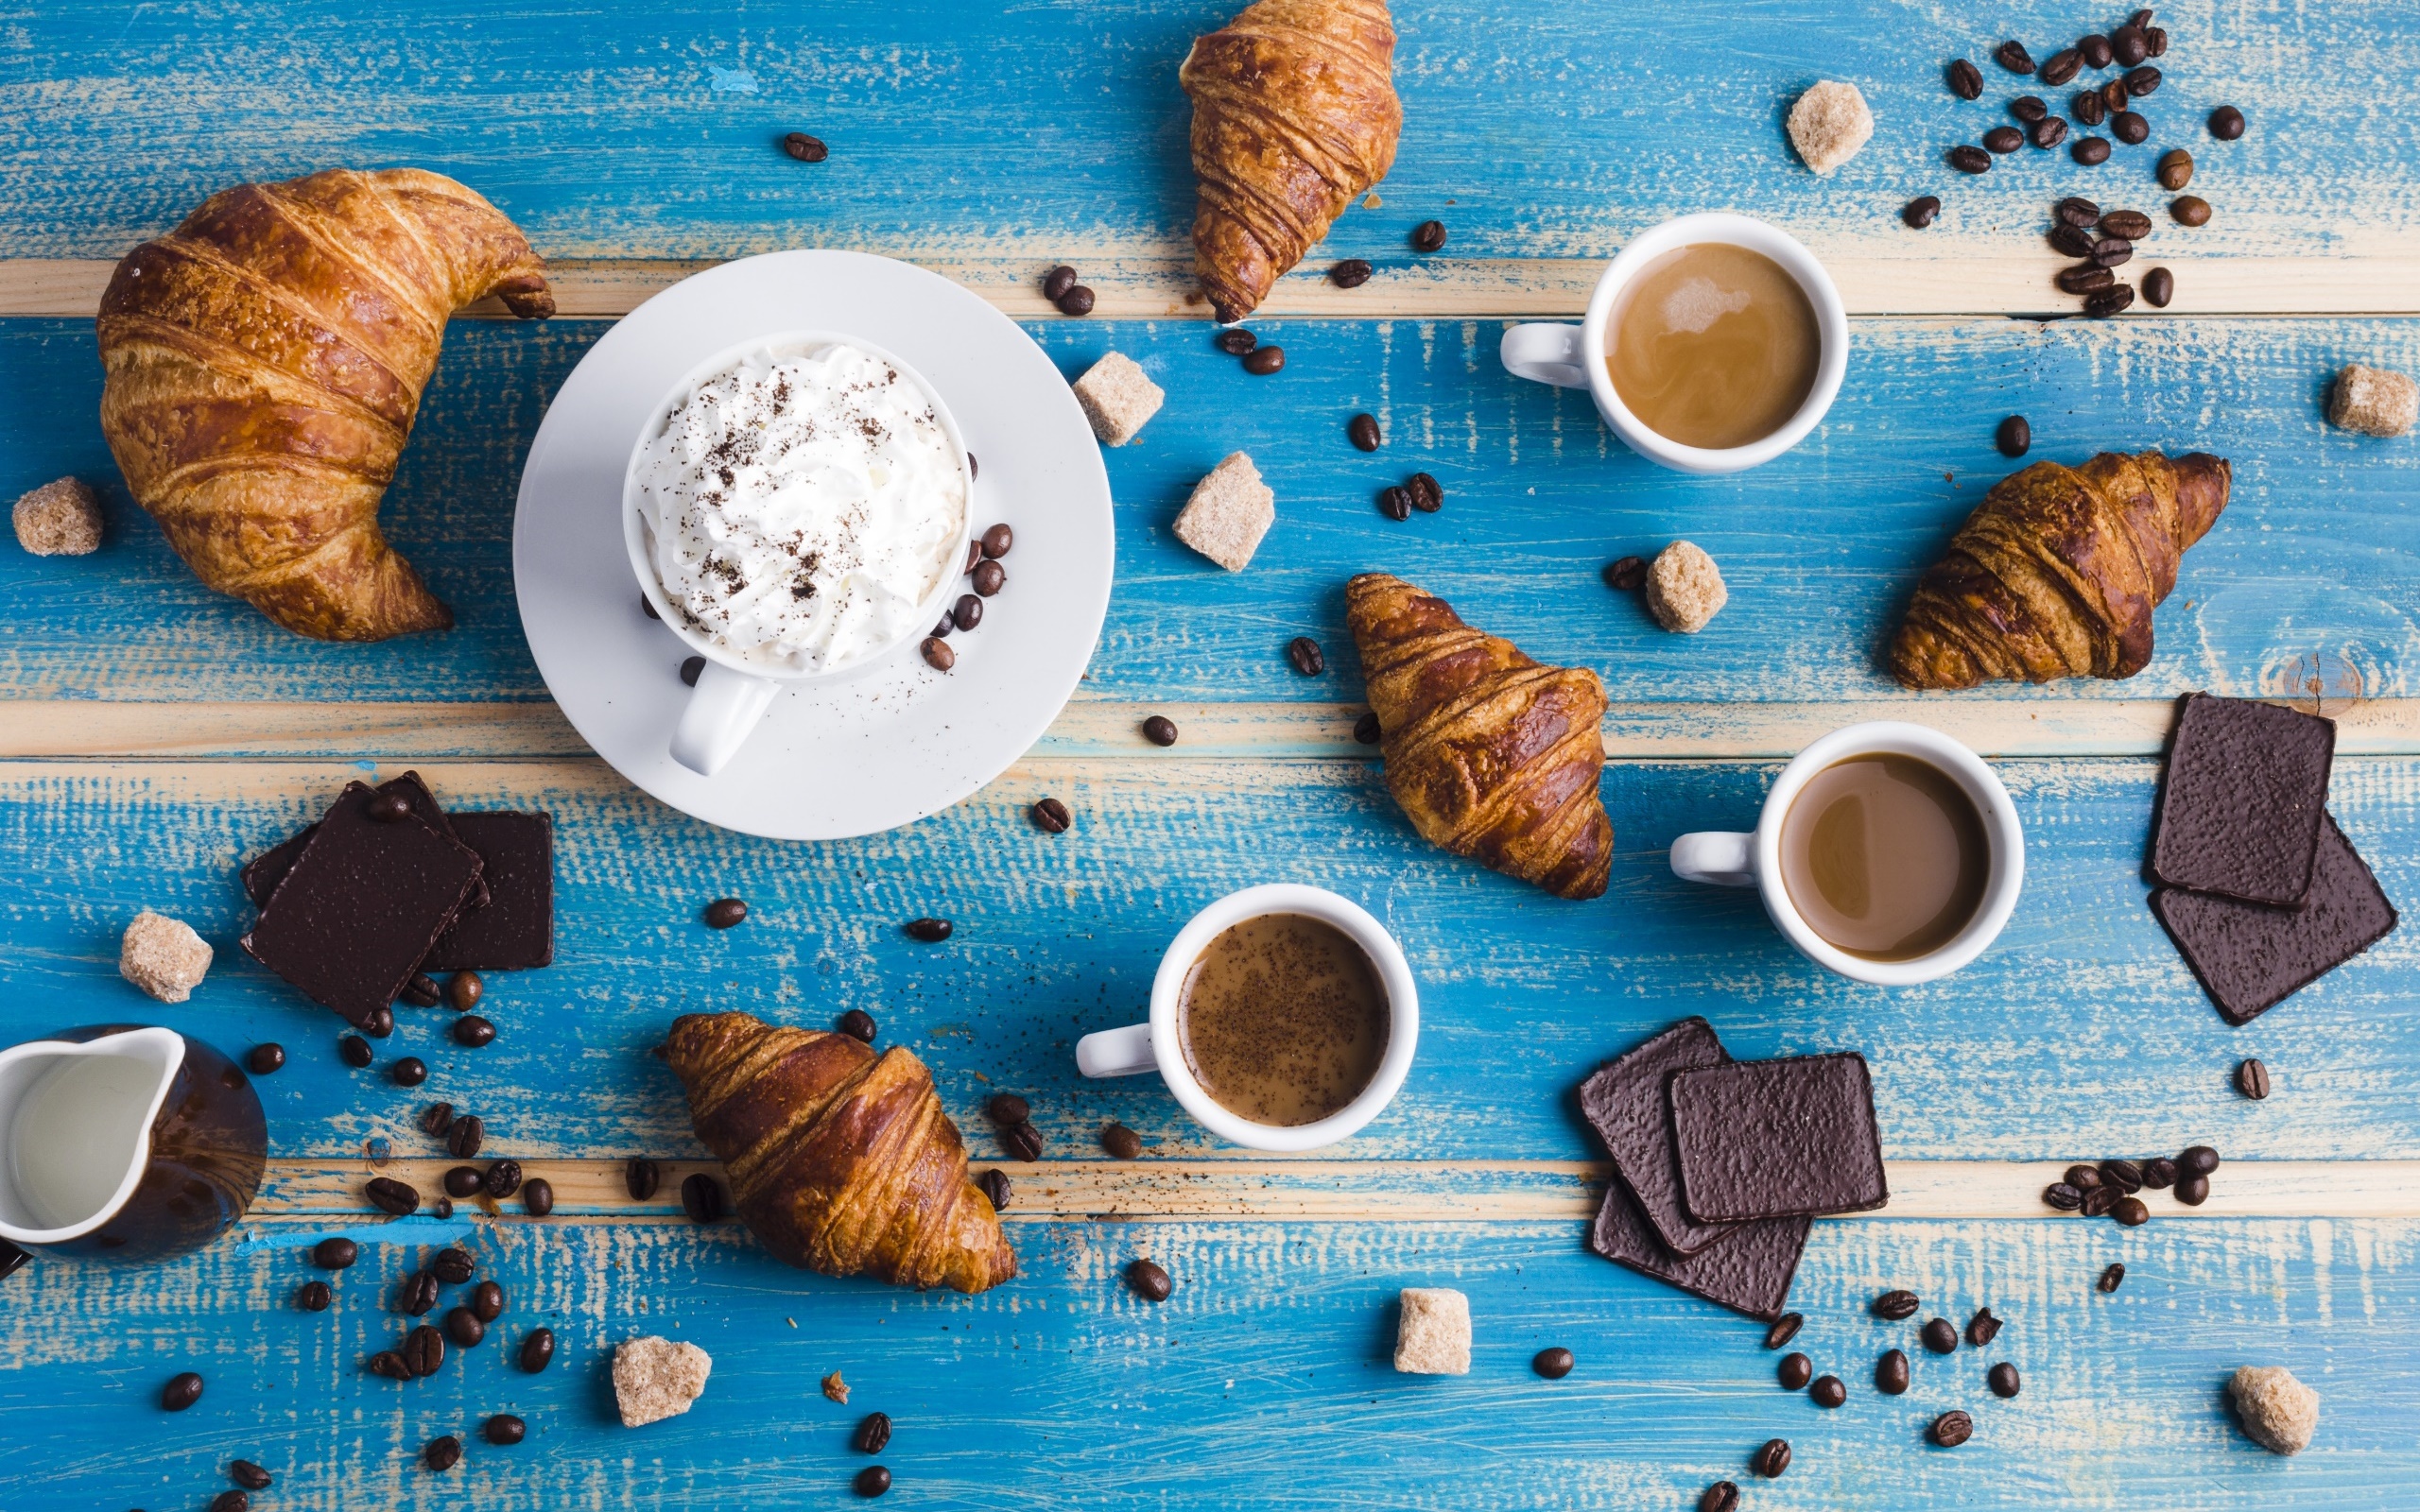 General 2560x1600 food still life sweets coffee croissants chocolate